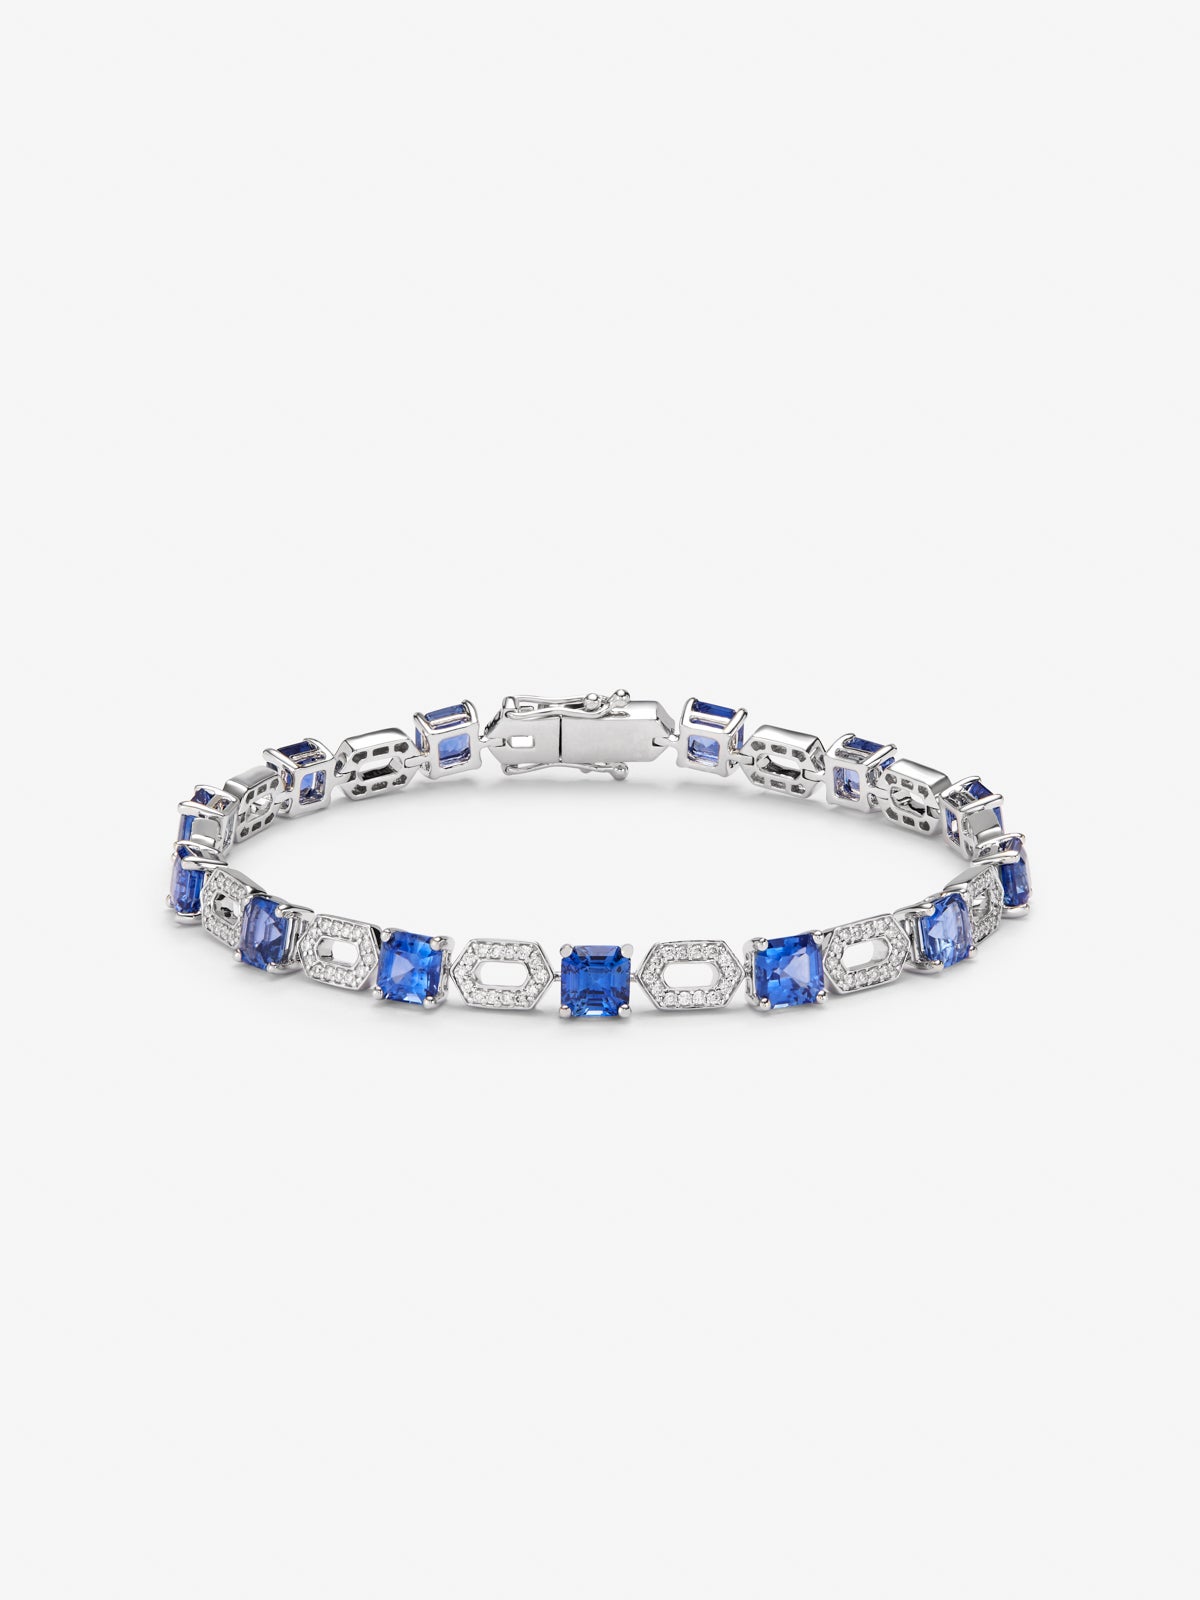 18K White Gold Bracelet with blue sapphiros in octagonal size of 9.37 cts and white diamonds in bright size of 0.69 cts